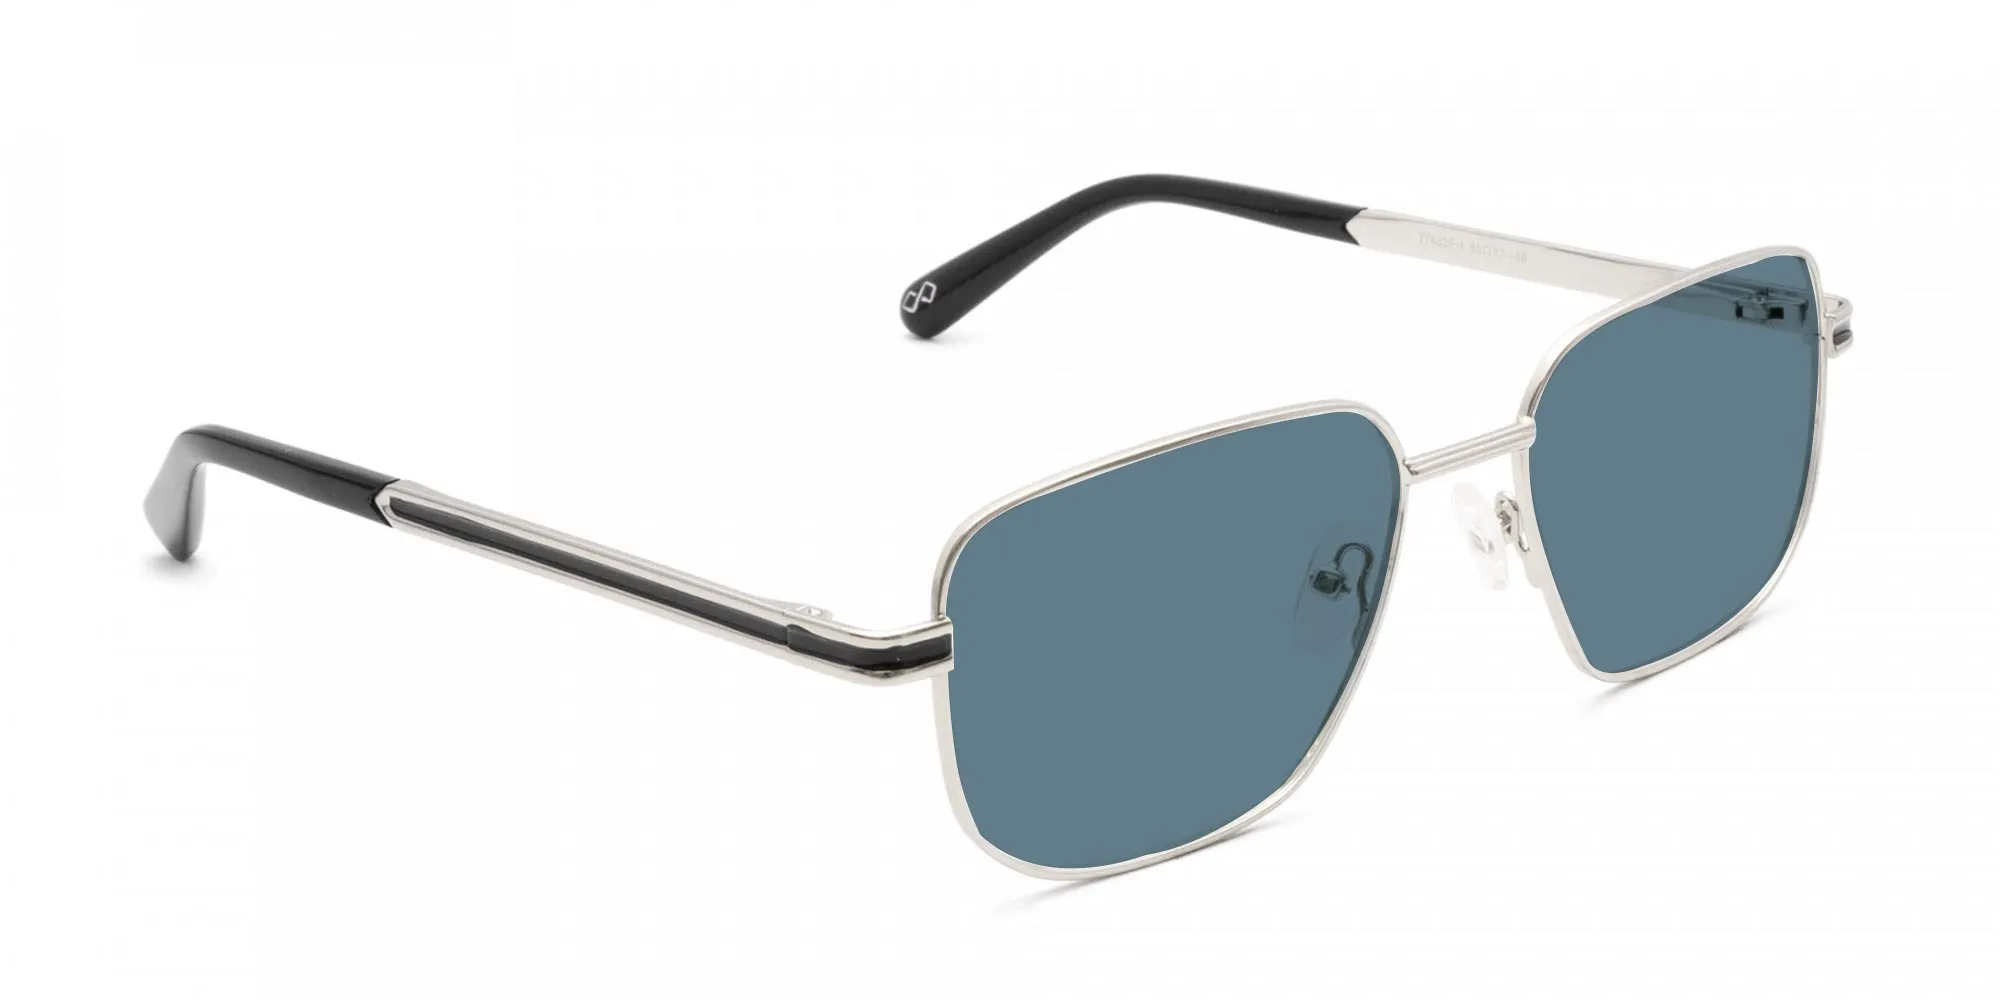 Silver Metal Sunglasses With Blue Tint-2